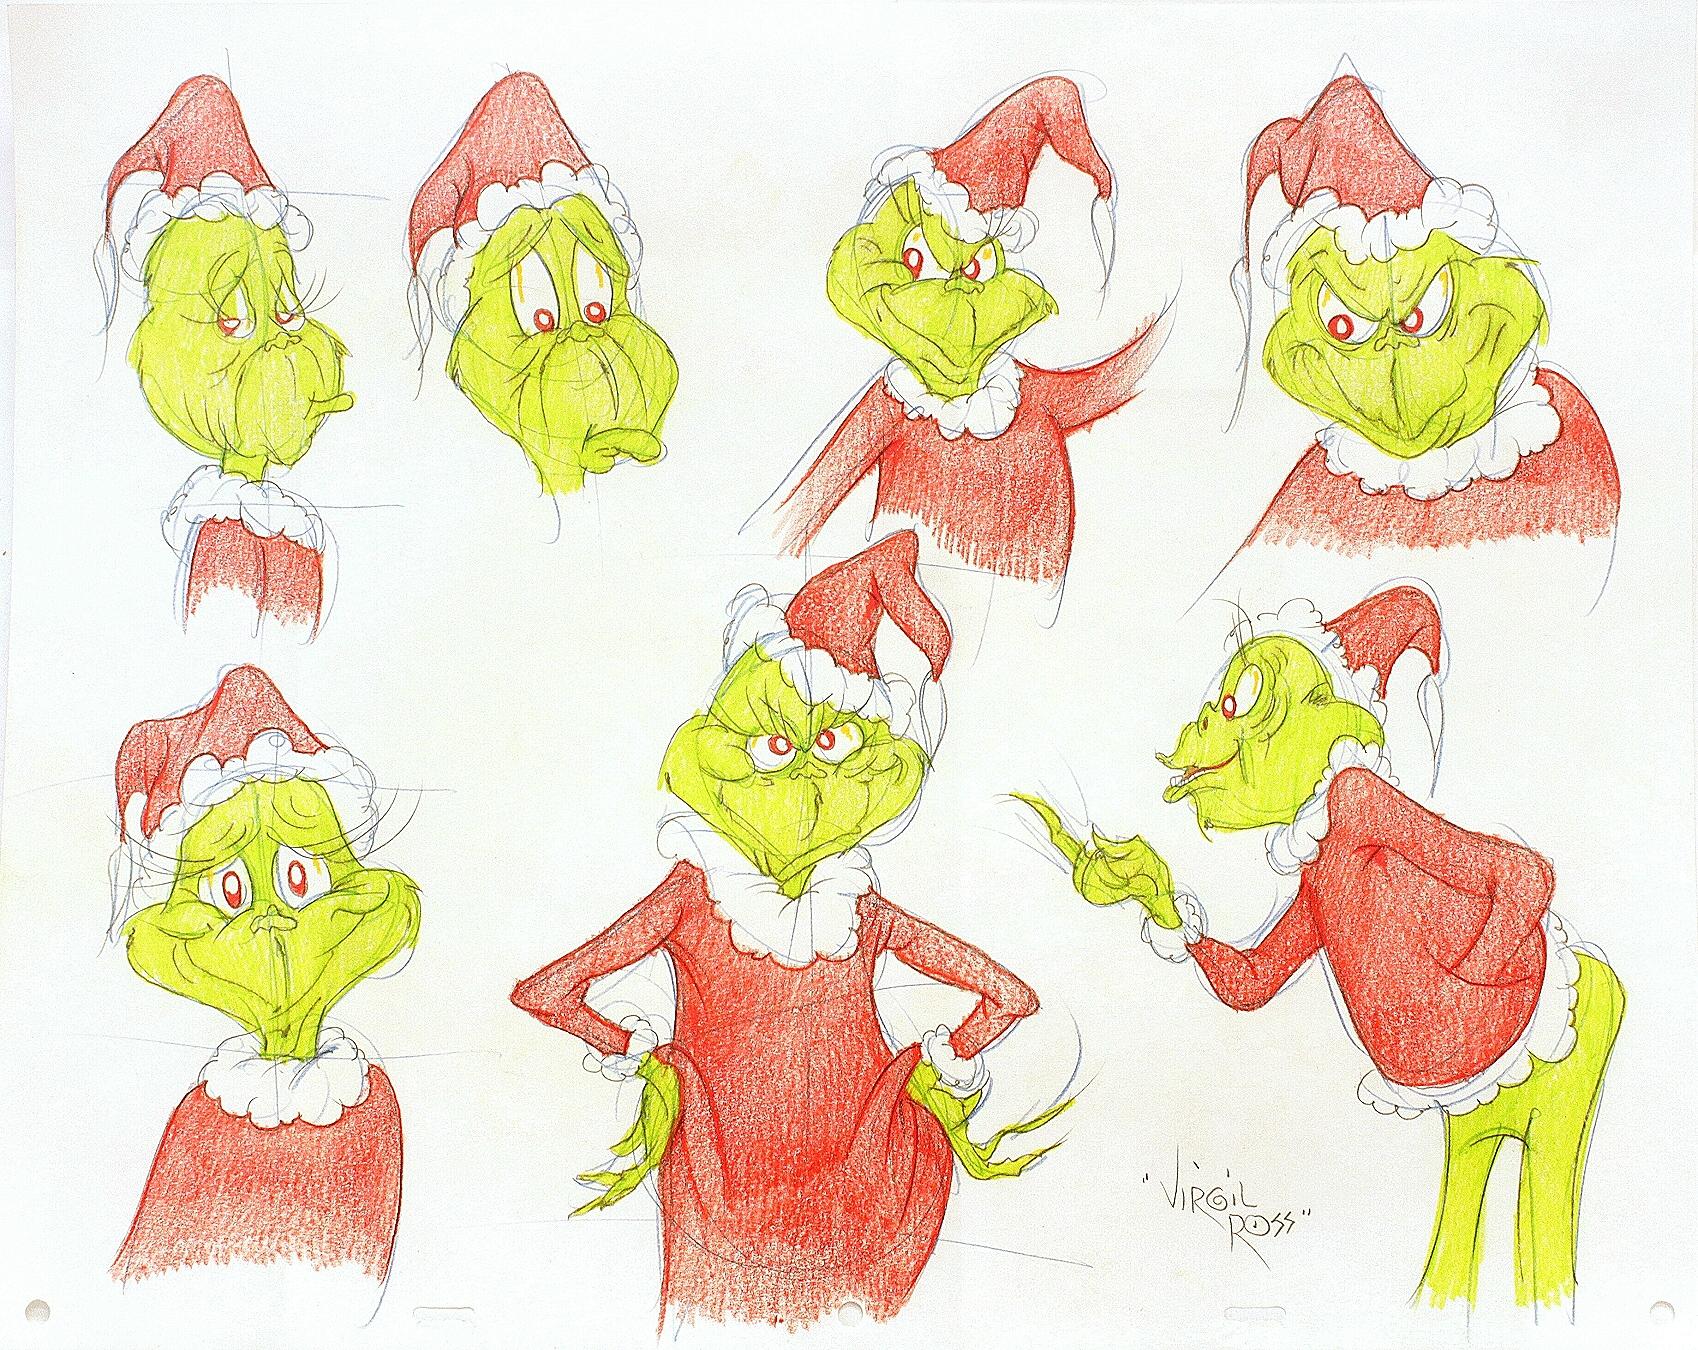 Author: GEISEL, Theodore: (Dr. Seuss) ( Virgil Ross ). 

Title: How The Grinch Stole Christmas. (Seven Original drawings). Warner Brothers Studios, (c.1990s)

Description: seven original drawings of the Grinch. 17